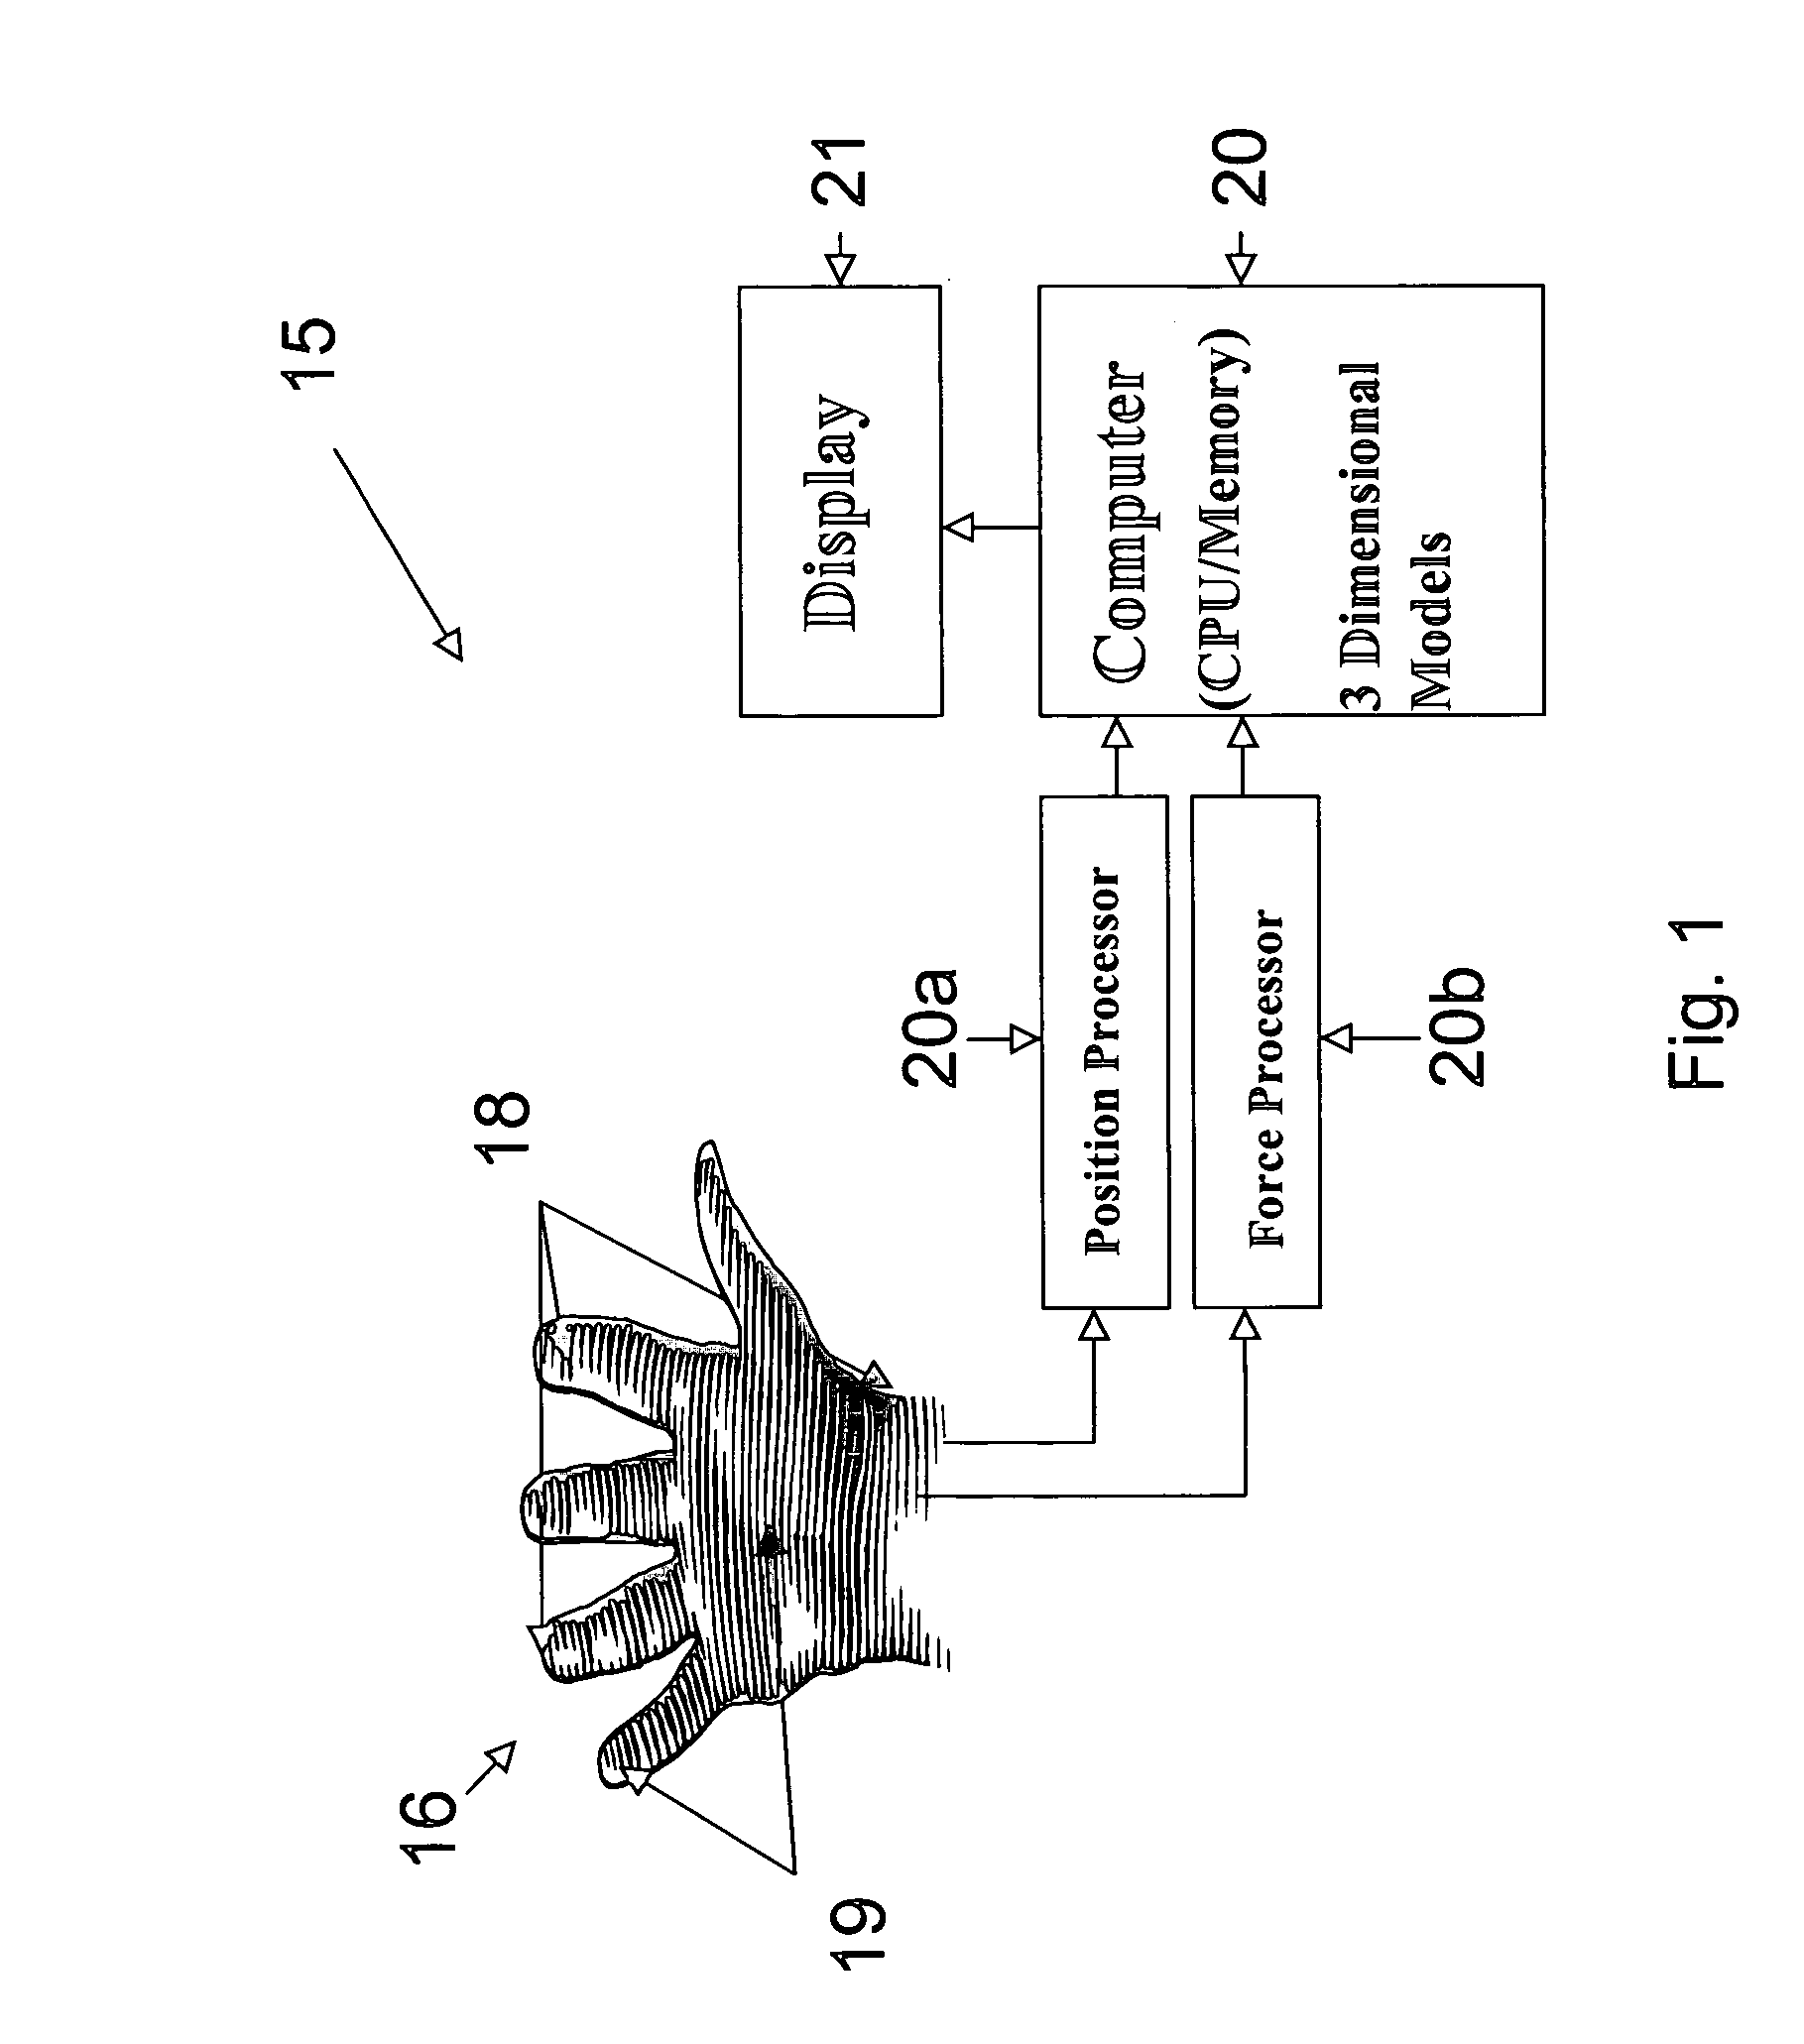 System for interfacing between an operator and a virtual object for computer aided design applications